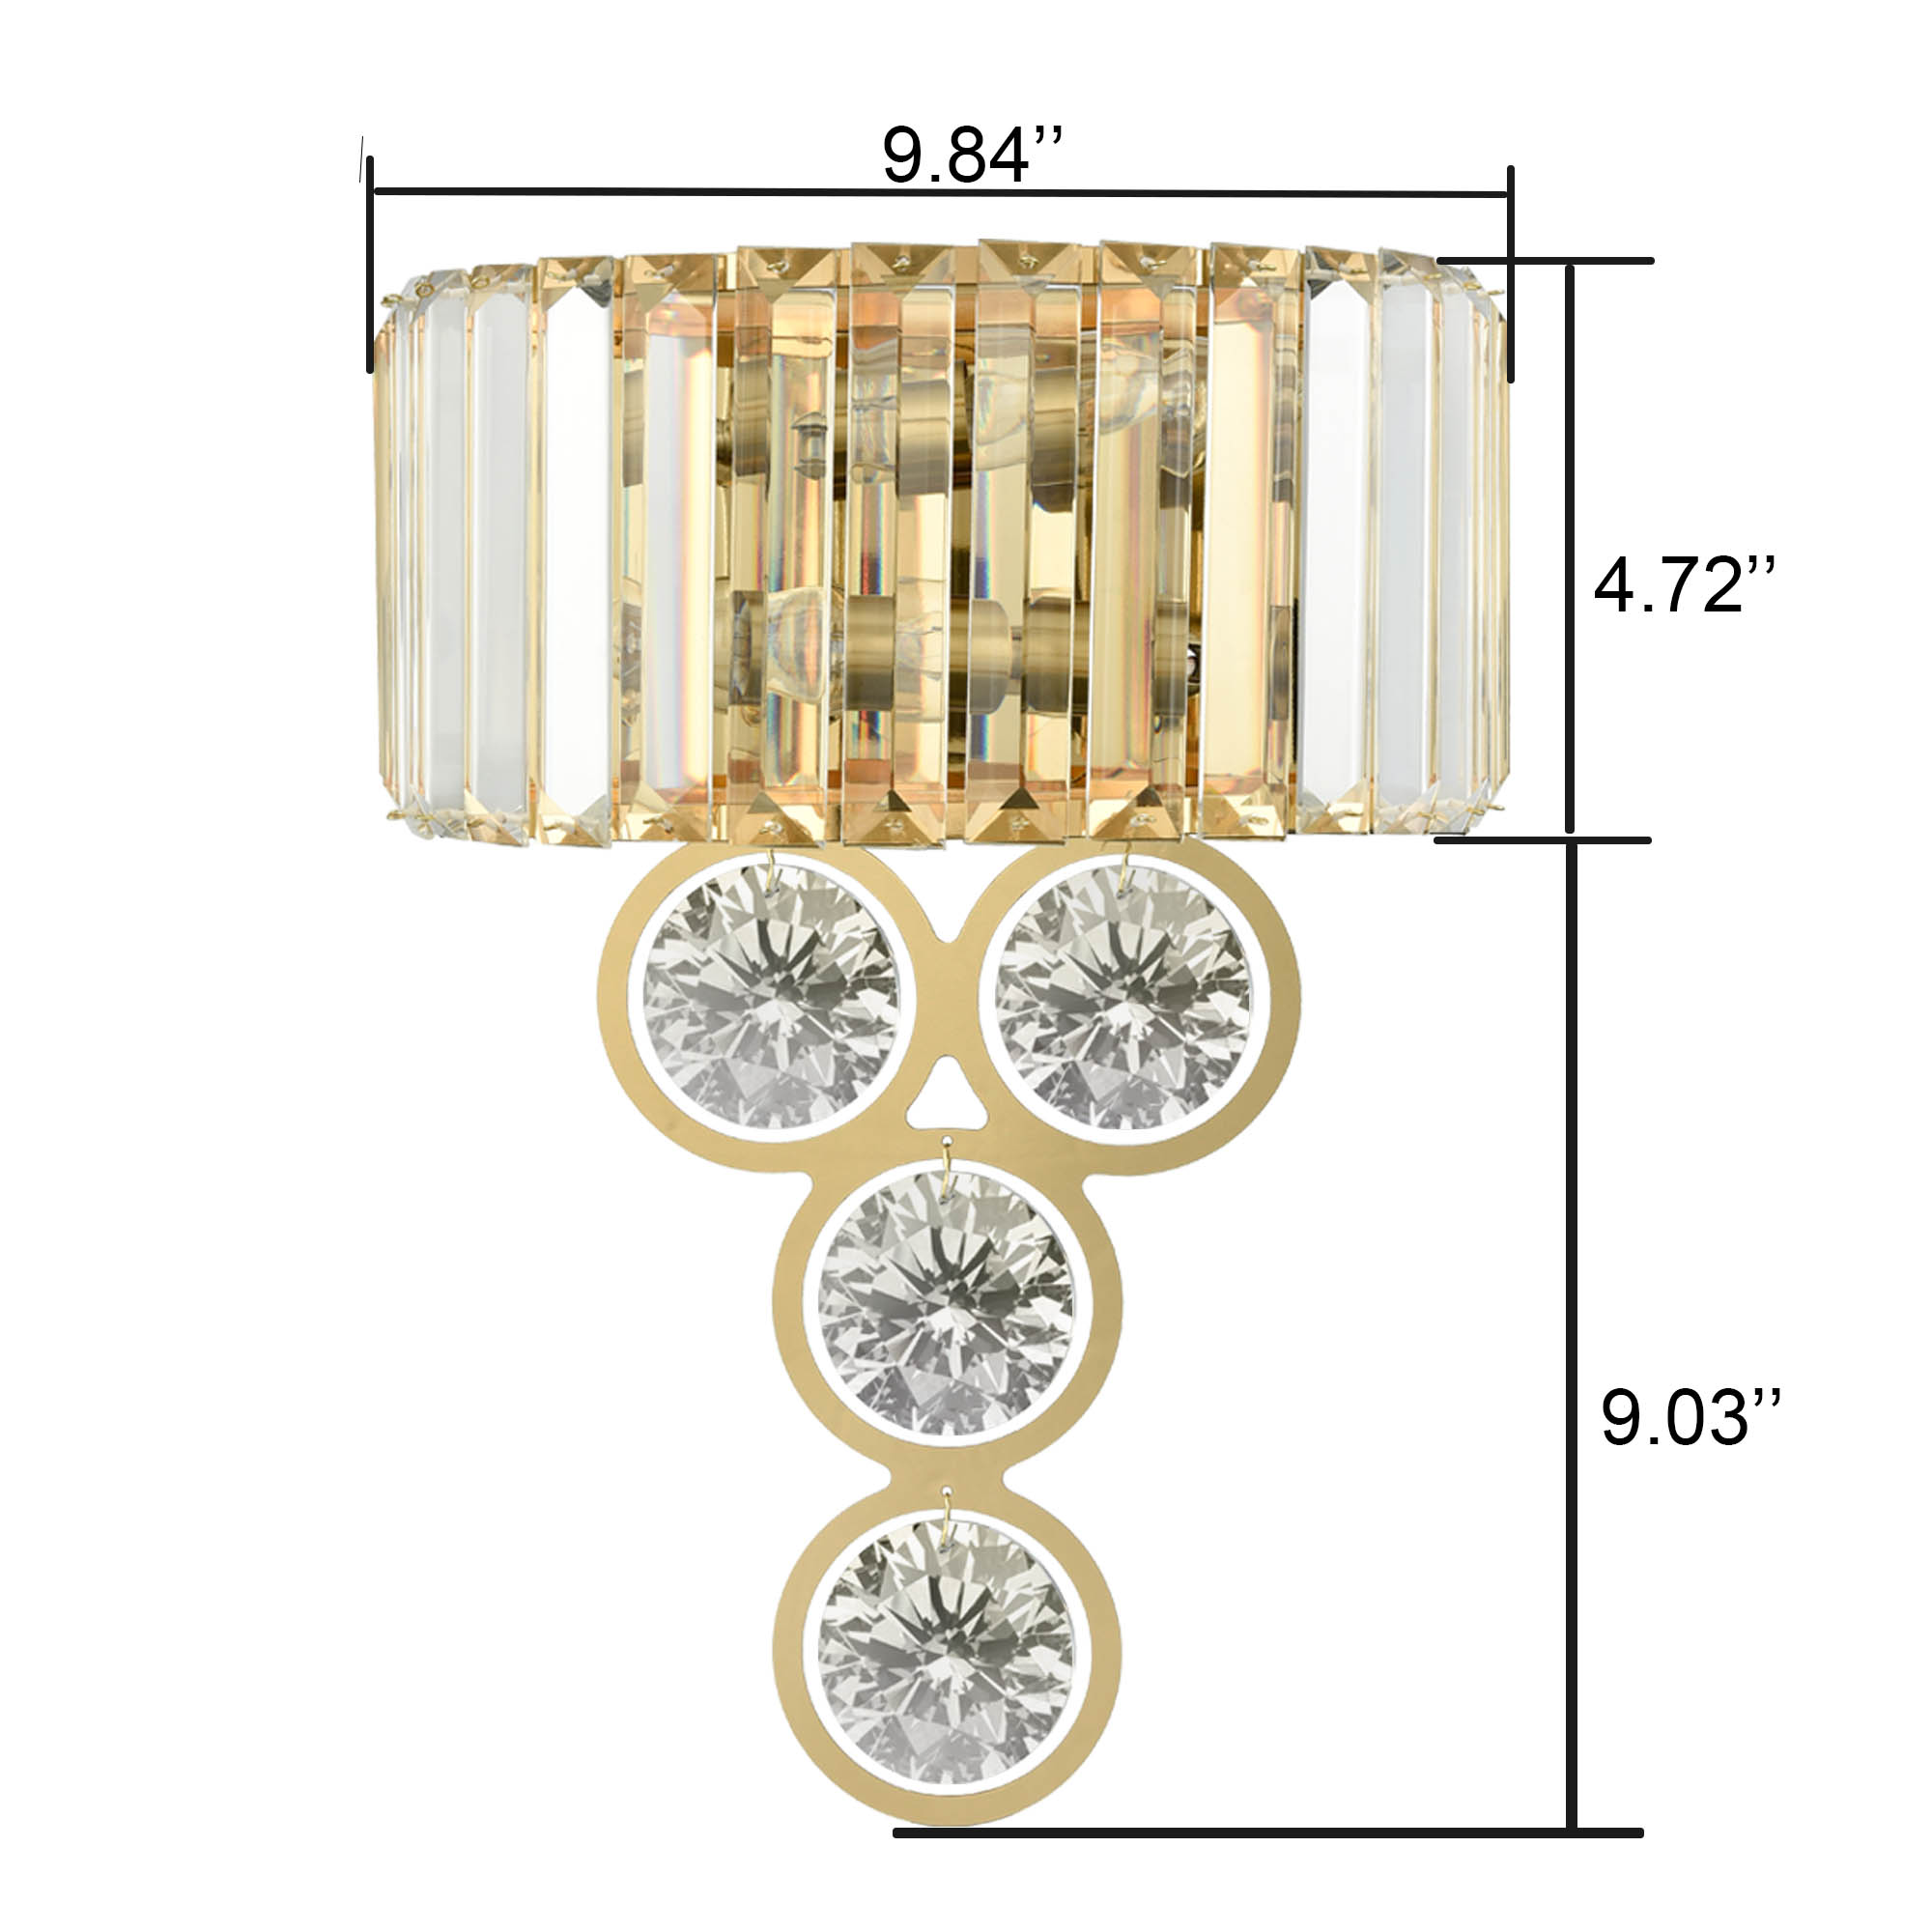 Modern 2-Light Gold Metal Wall Sconce with Crystal Wall Lamp for Bedroom Living Room Vanity Lighting Fixture